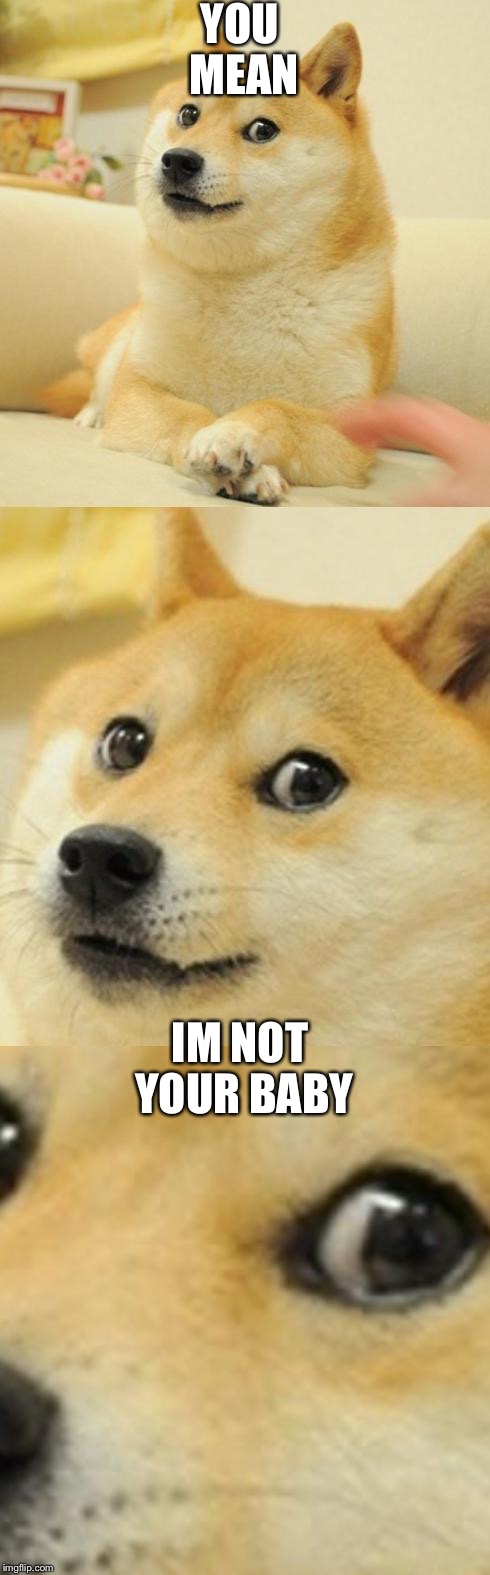 Doge Game |  YOU MEAN; IM NOT YOUR BABY | image tagged in doge game | made w/ Imgflip meme maker